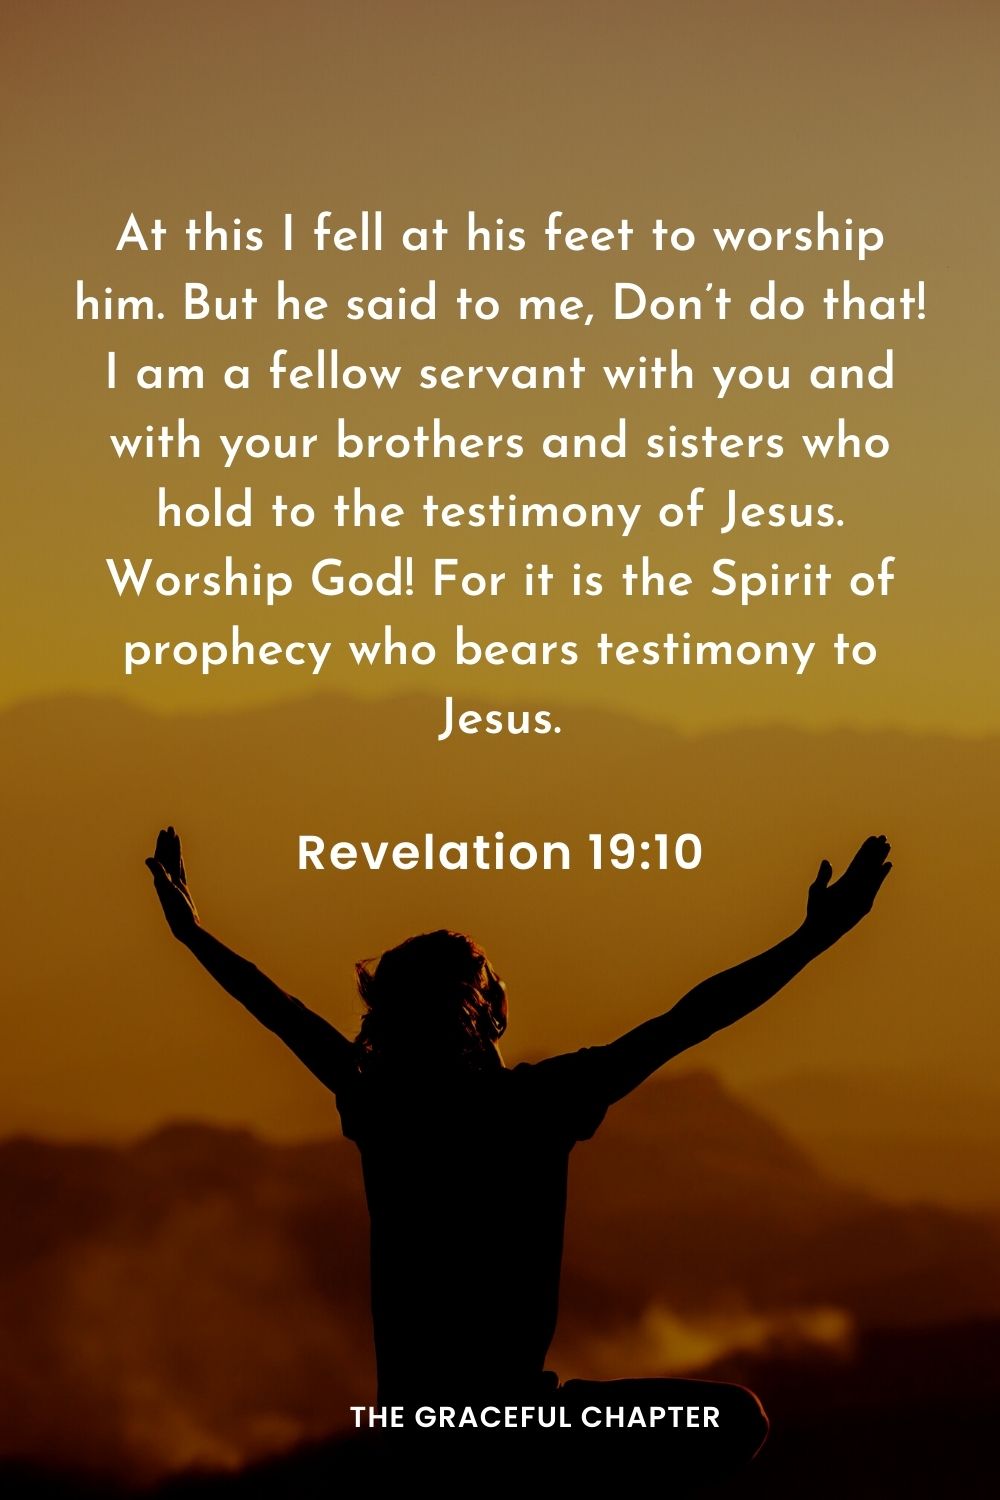 At this I fell at his feet to worship him. But he said to me, Don’t do that! I am a fellow servant with you and with your brothers and sisters who hold to the testimony of Jesus. Worship God! For it is the Spirit of prophecy who bears testimony to Jesus.